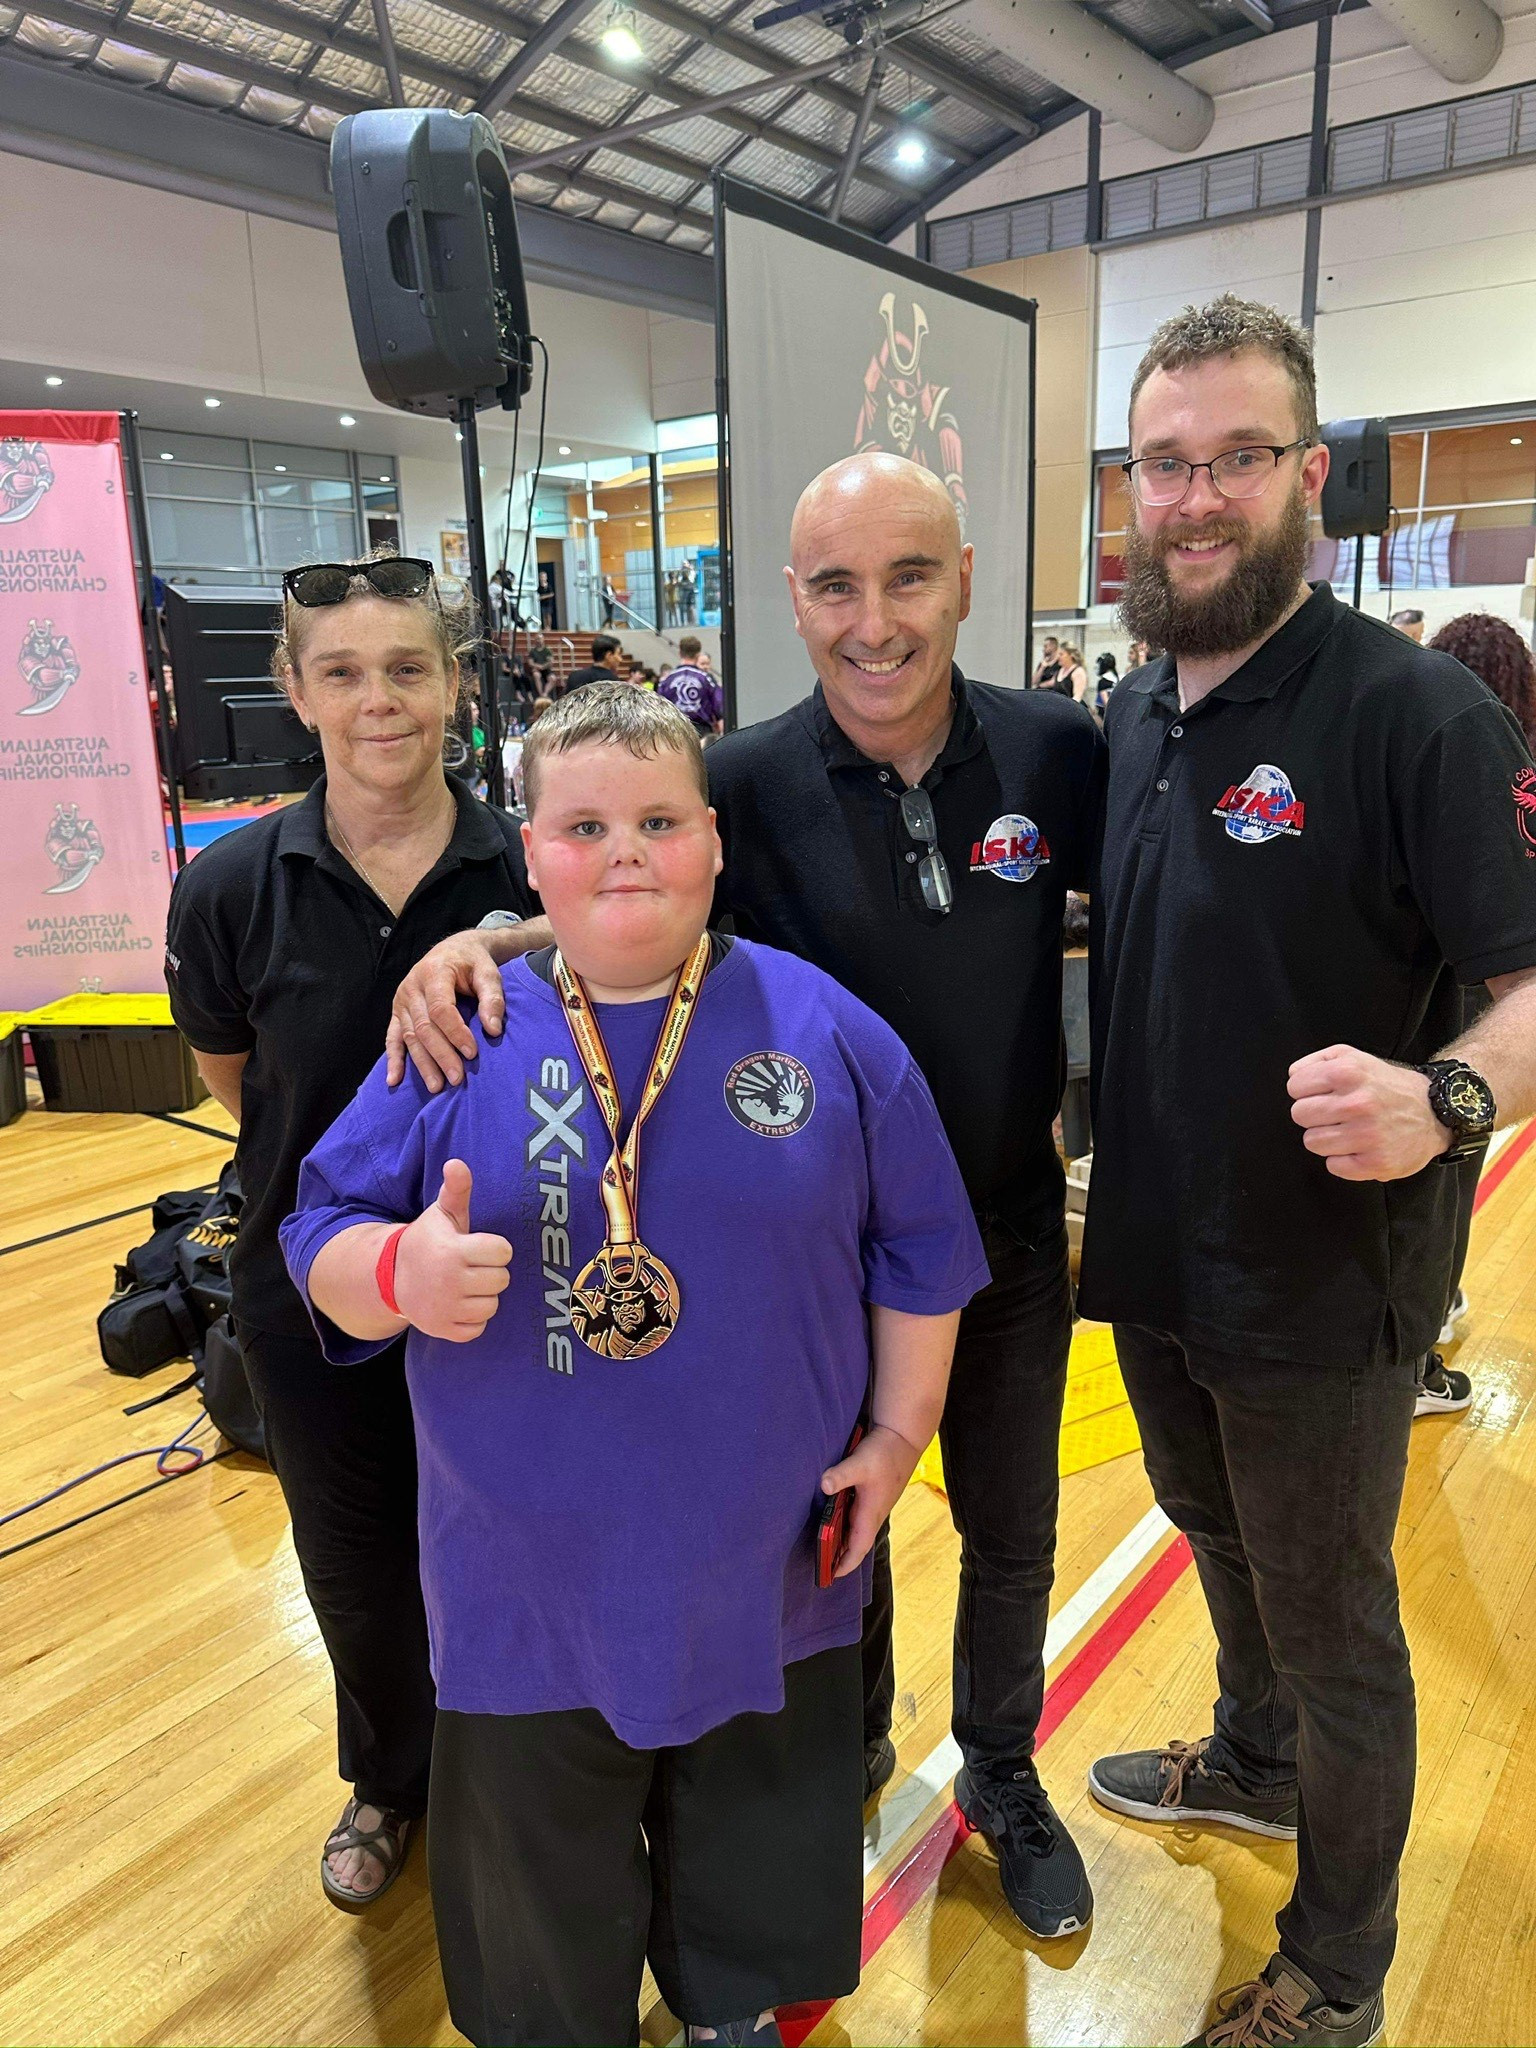 Michael Cox (front) was presented with a first placing in BJJ for 8-9 year olds, for showing great sportsmanship in stepping up to the 10-12 year division.